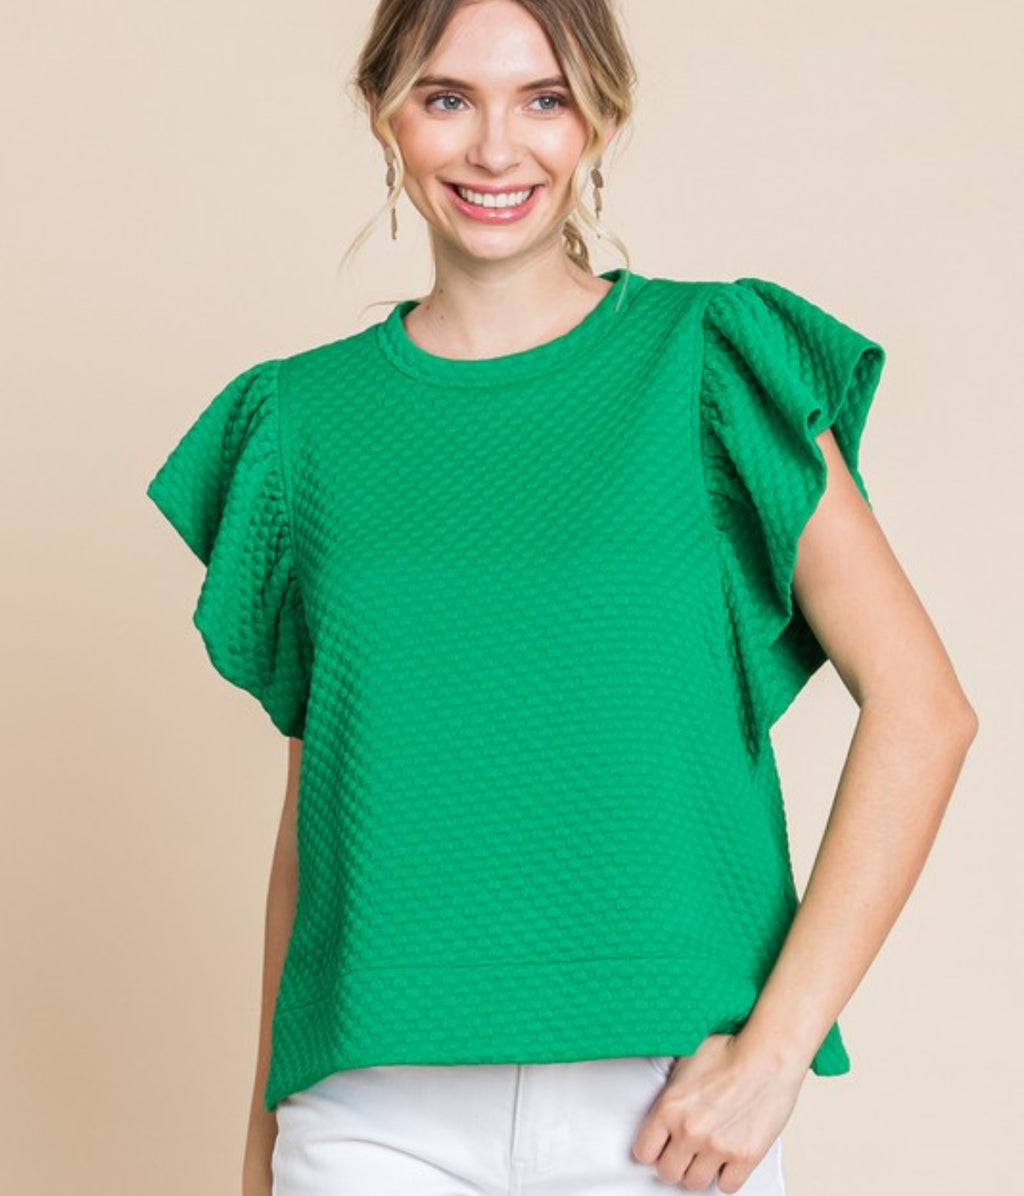 Kelly green knit textured top with ruffled sleeves